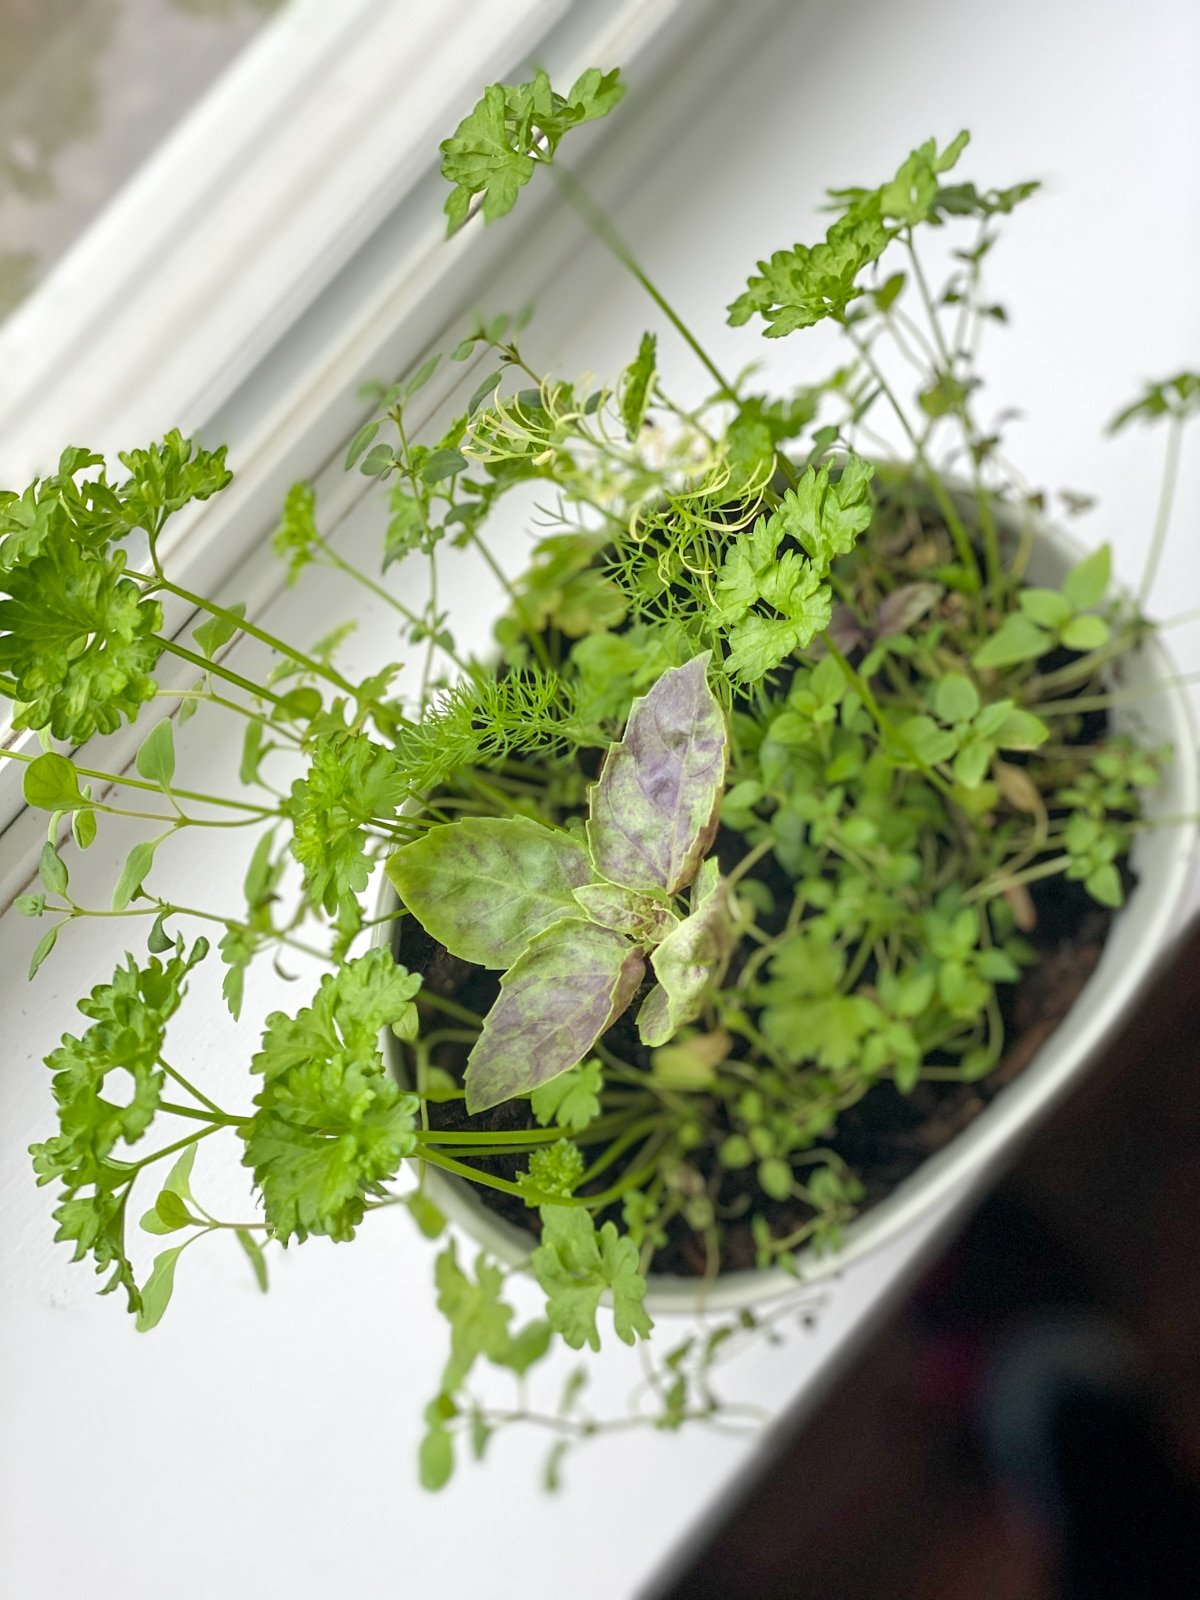 growing a variety of herbs for cooking